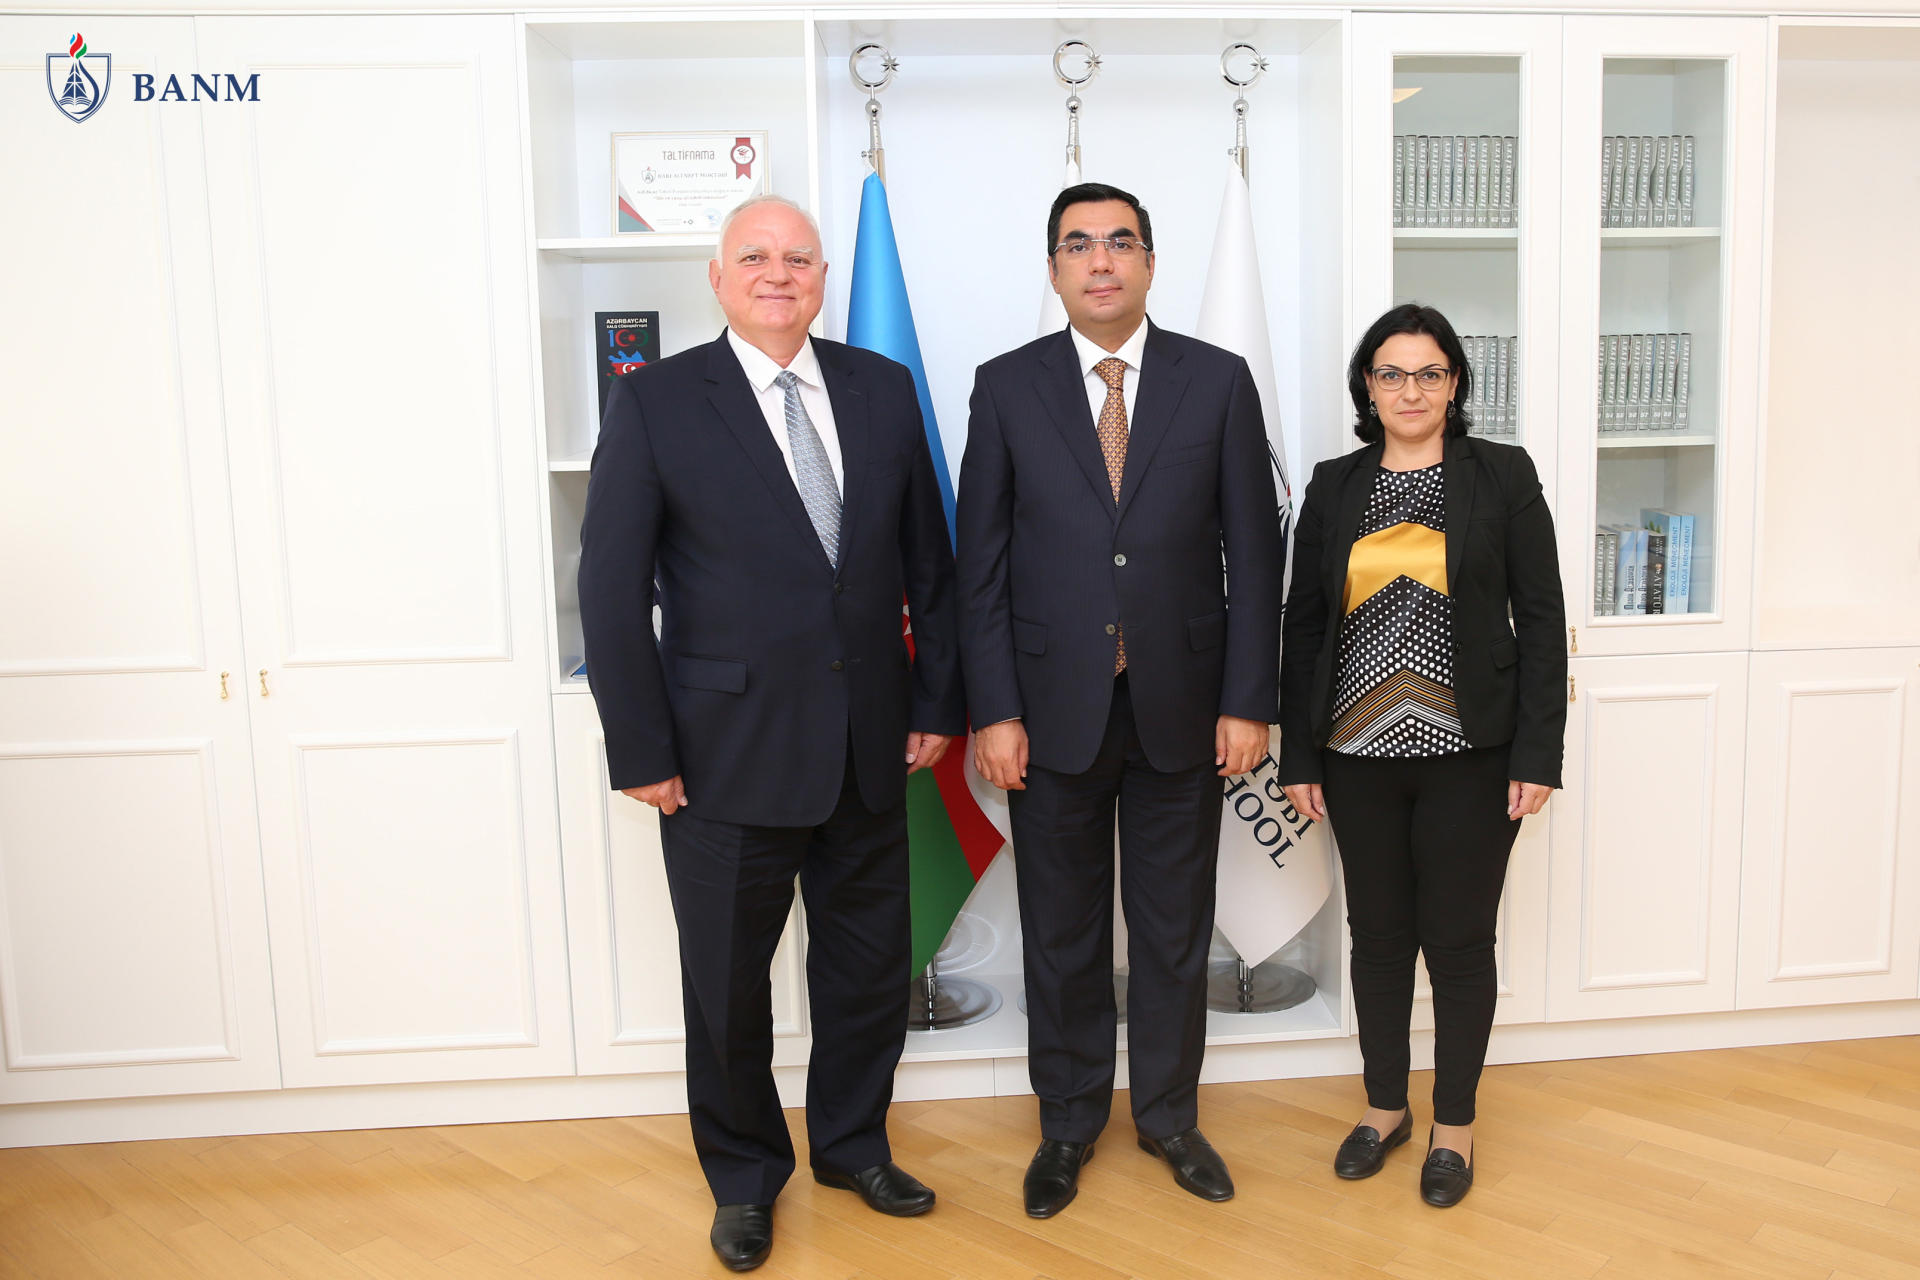 Baku Higher Oil School, University of Ruse of Bulgaria discuss joint training of specialists for Master's degree